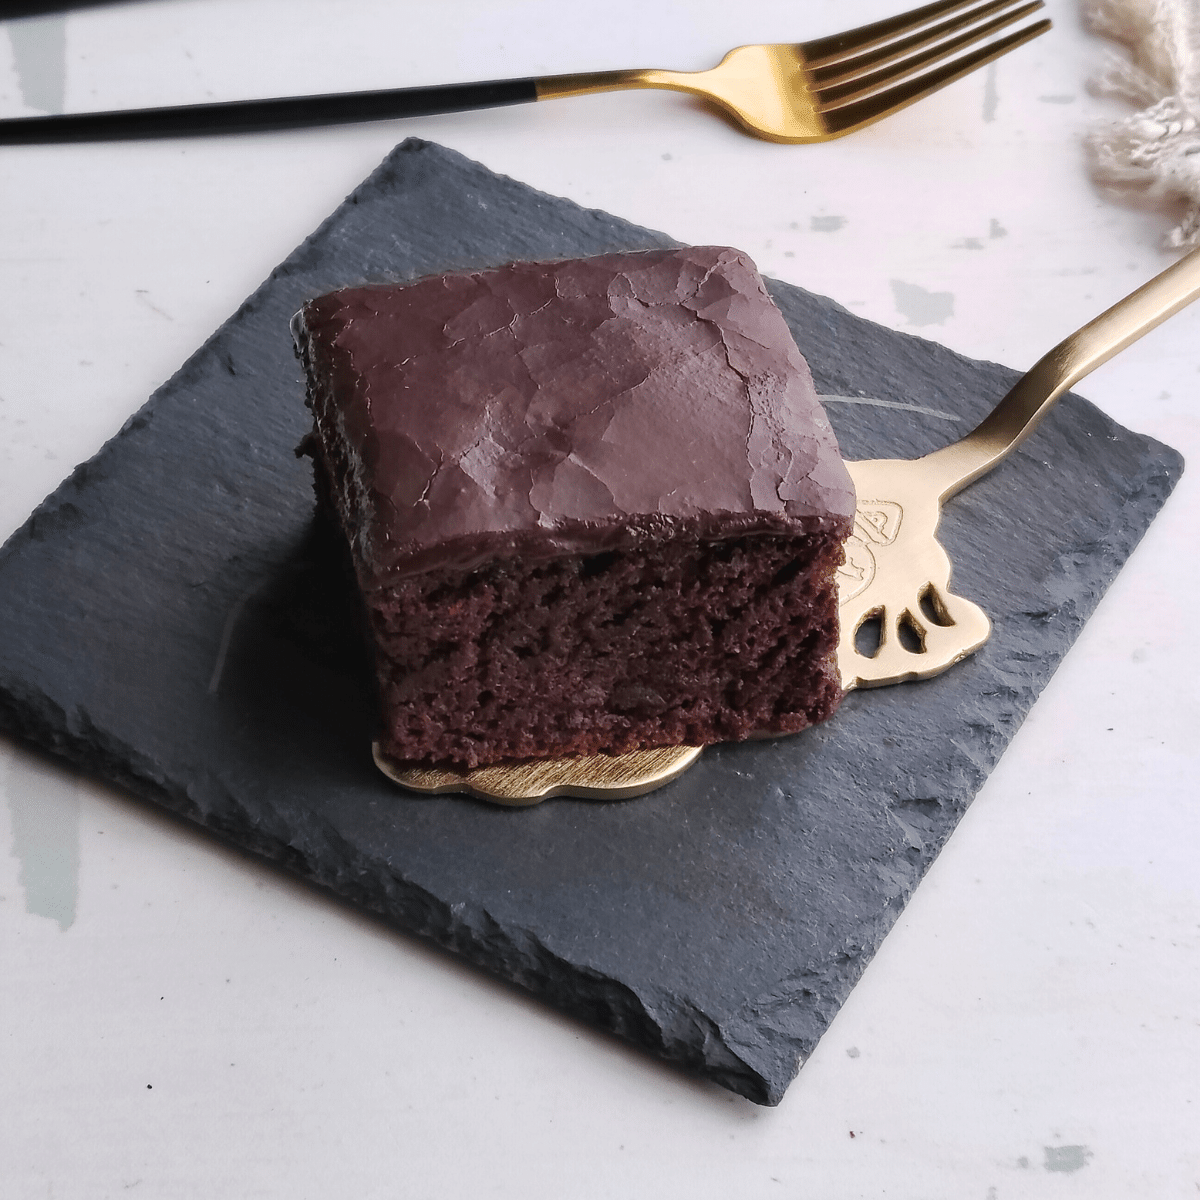 This Egg-Free Coca-Cola Chocolate Cake is just right - not overly sweet. It's like a blend of brownie and soft cake.